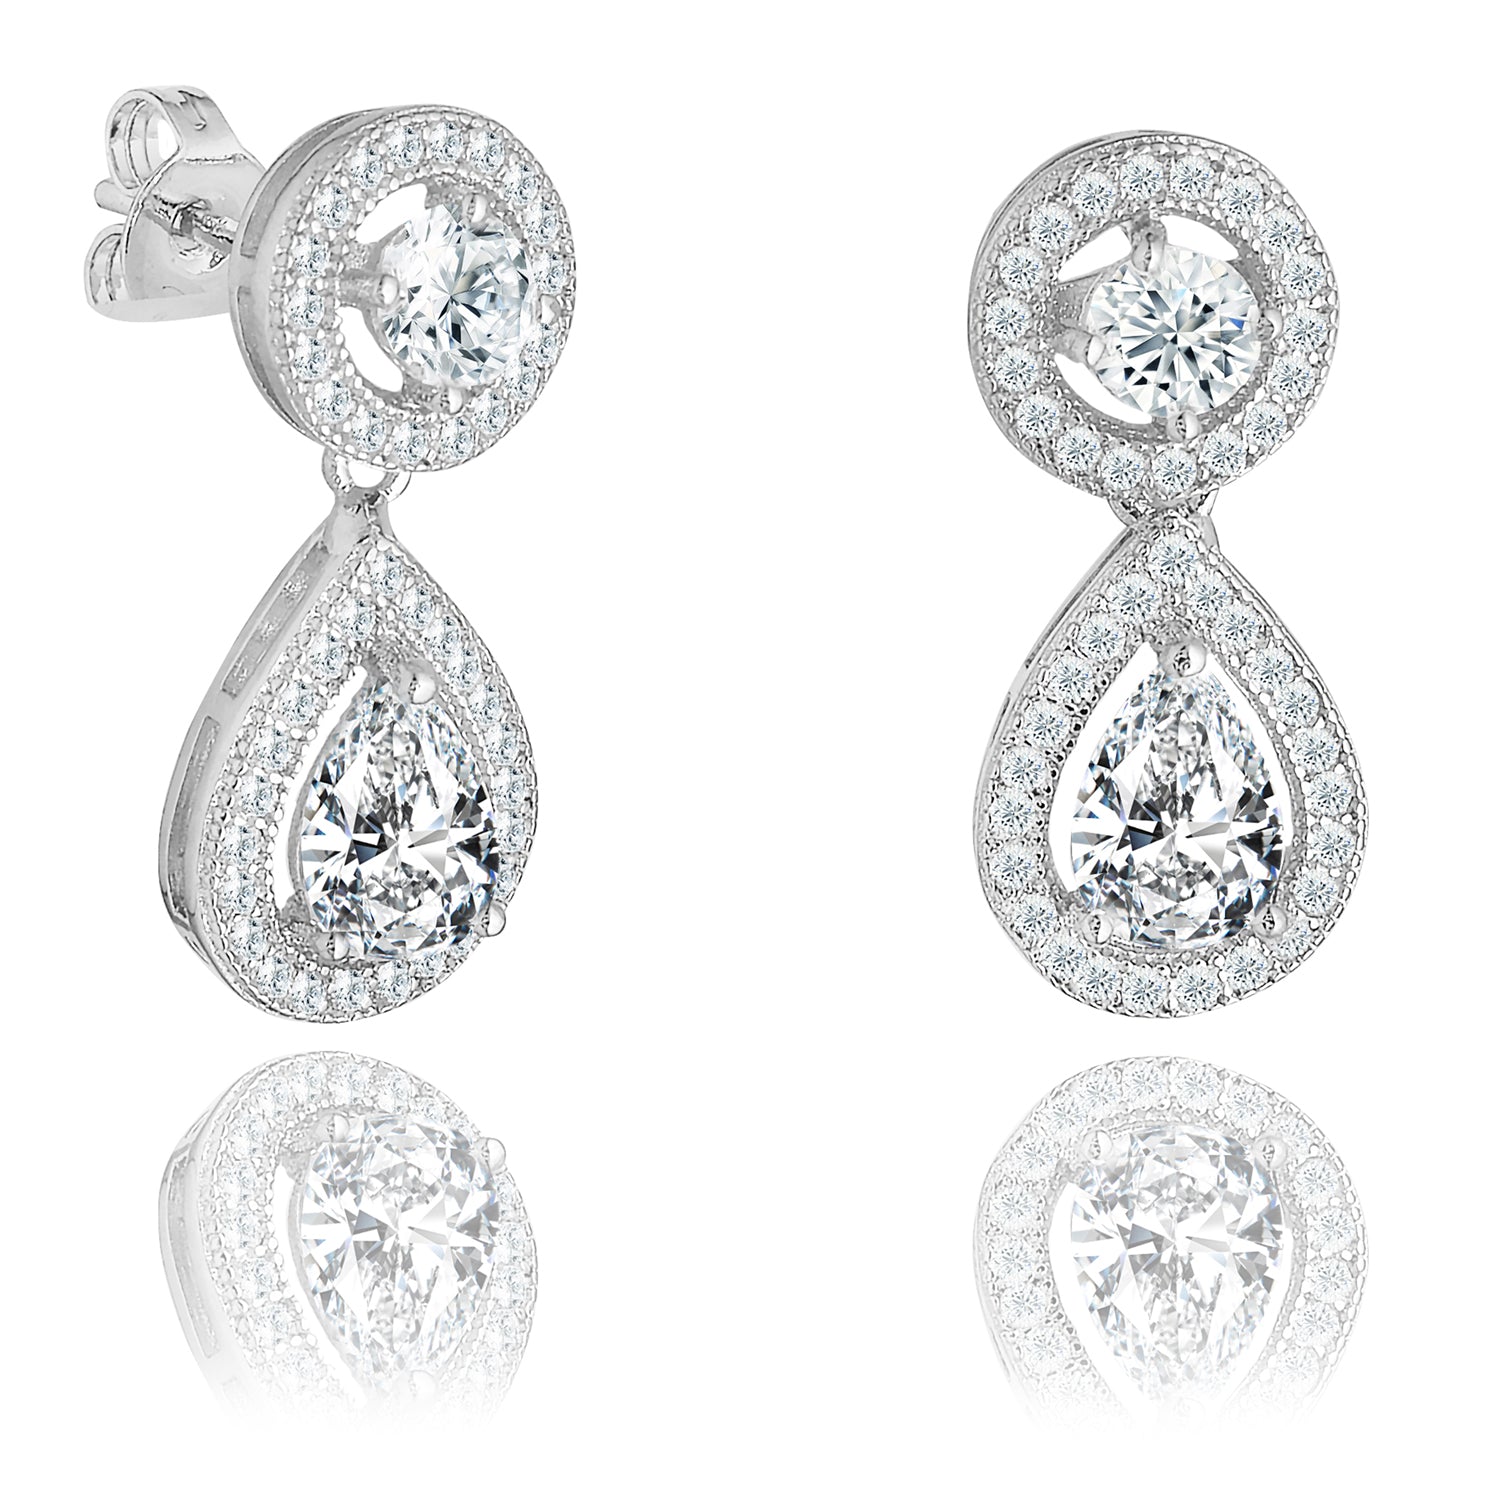 Elora 18k White Gold Plated Silver Tear Drop Stud Earrings with Simulated Diamond CZ Crystals